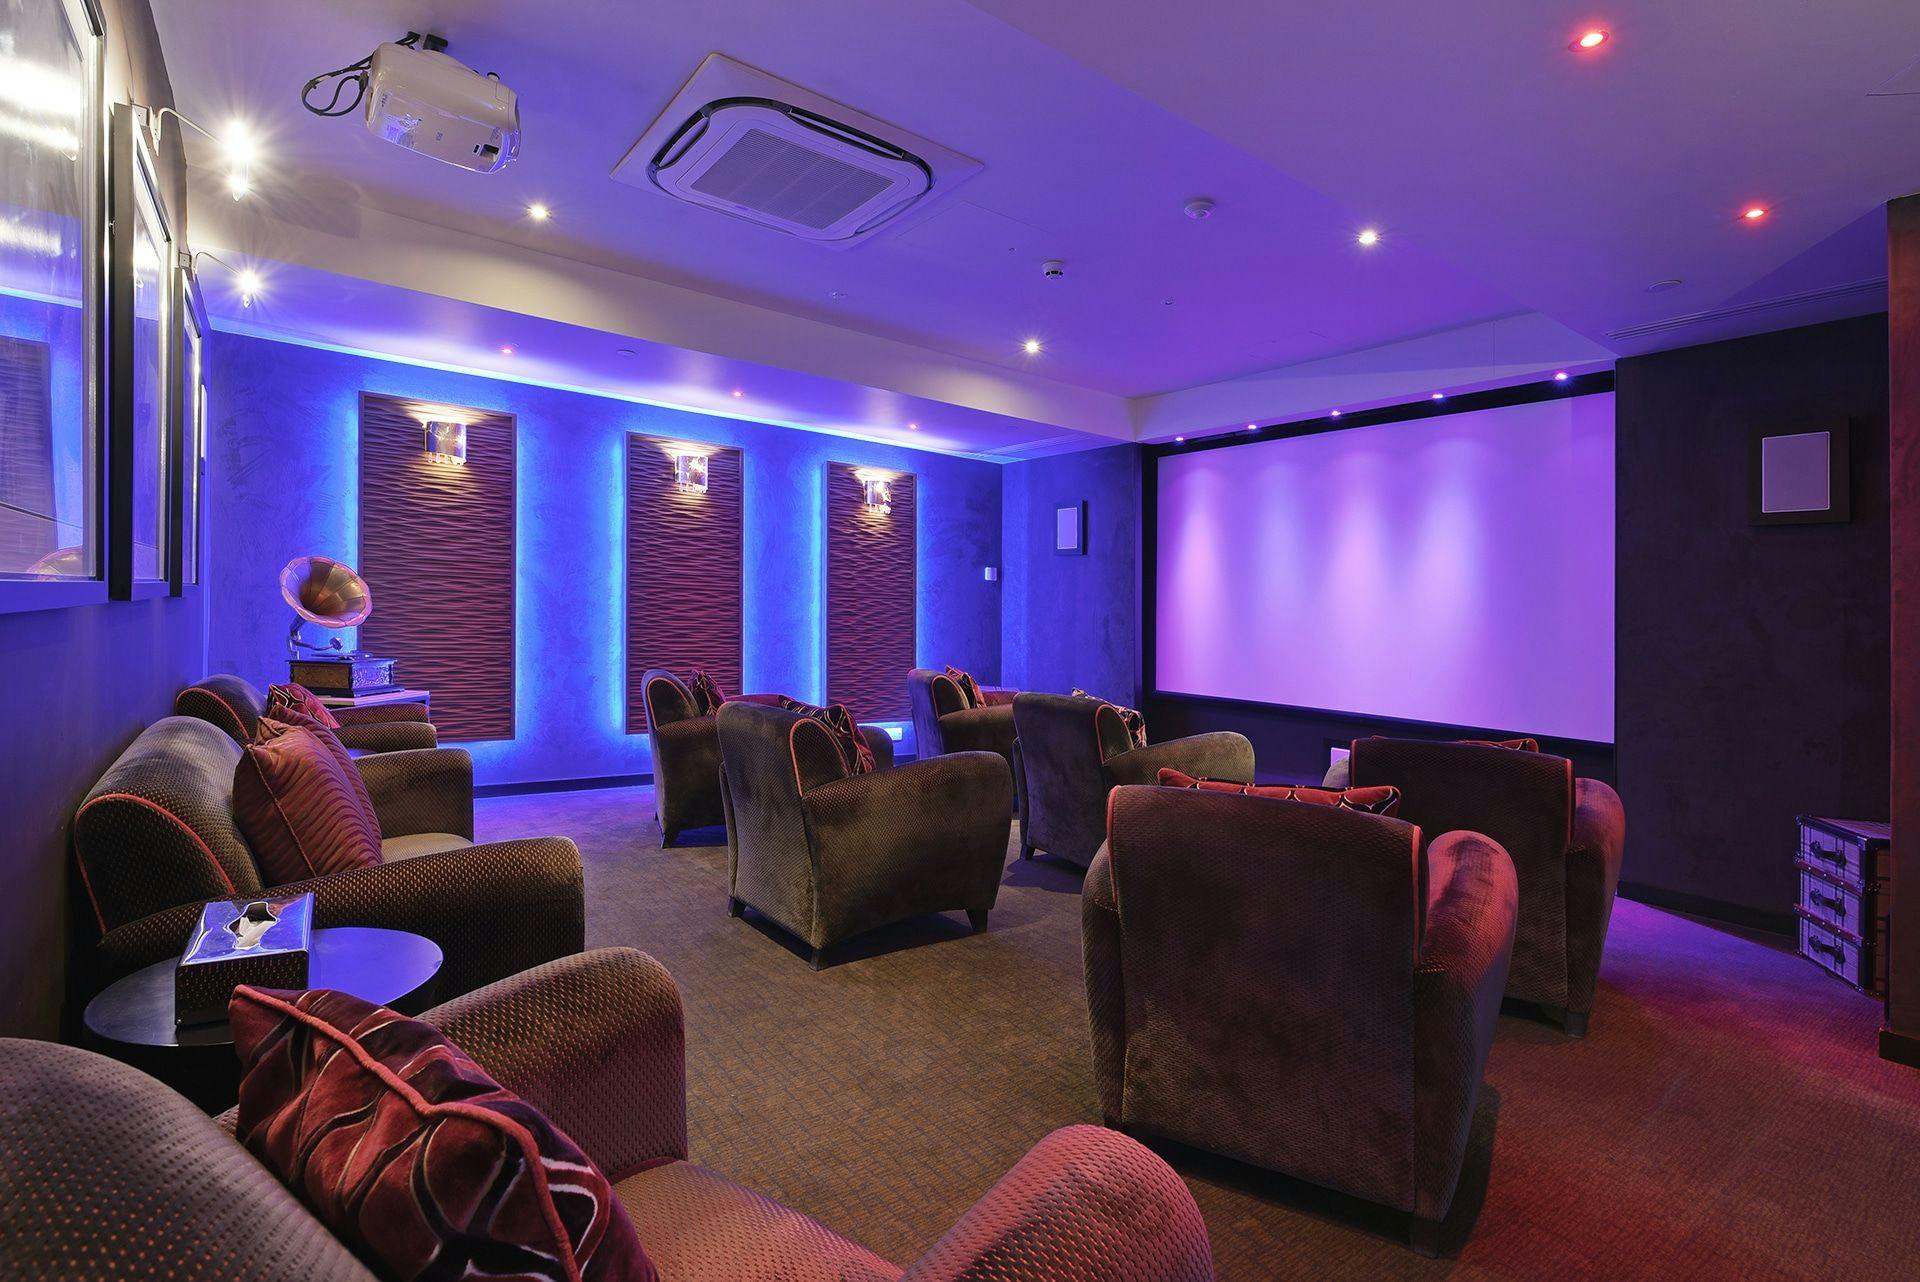 Cinema room of Brentwood Arches care home in Brentwood, Essex